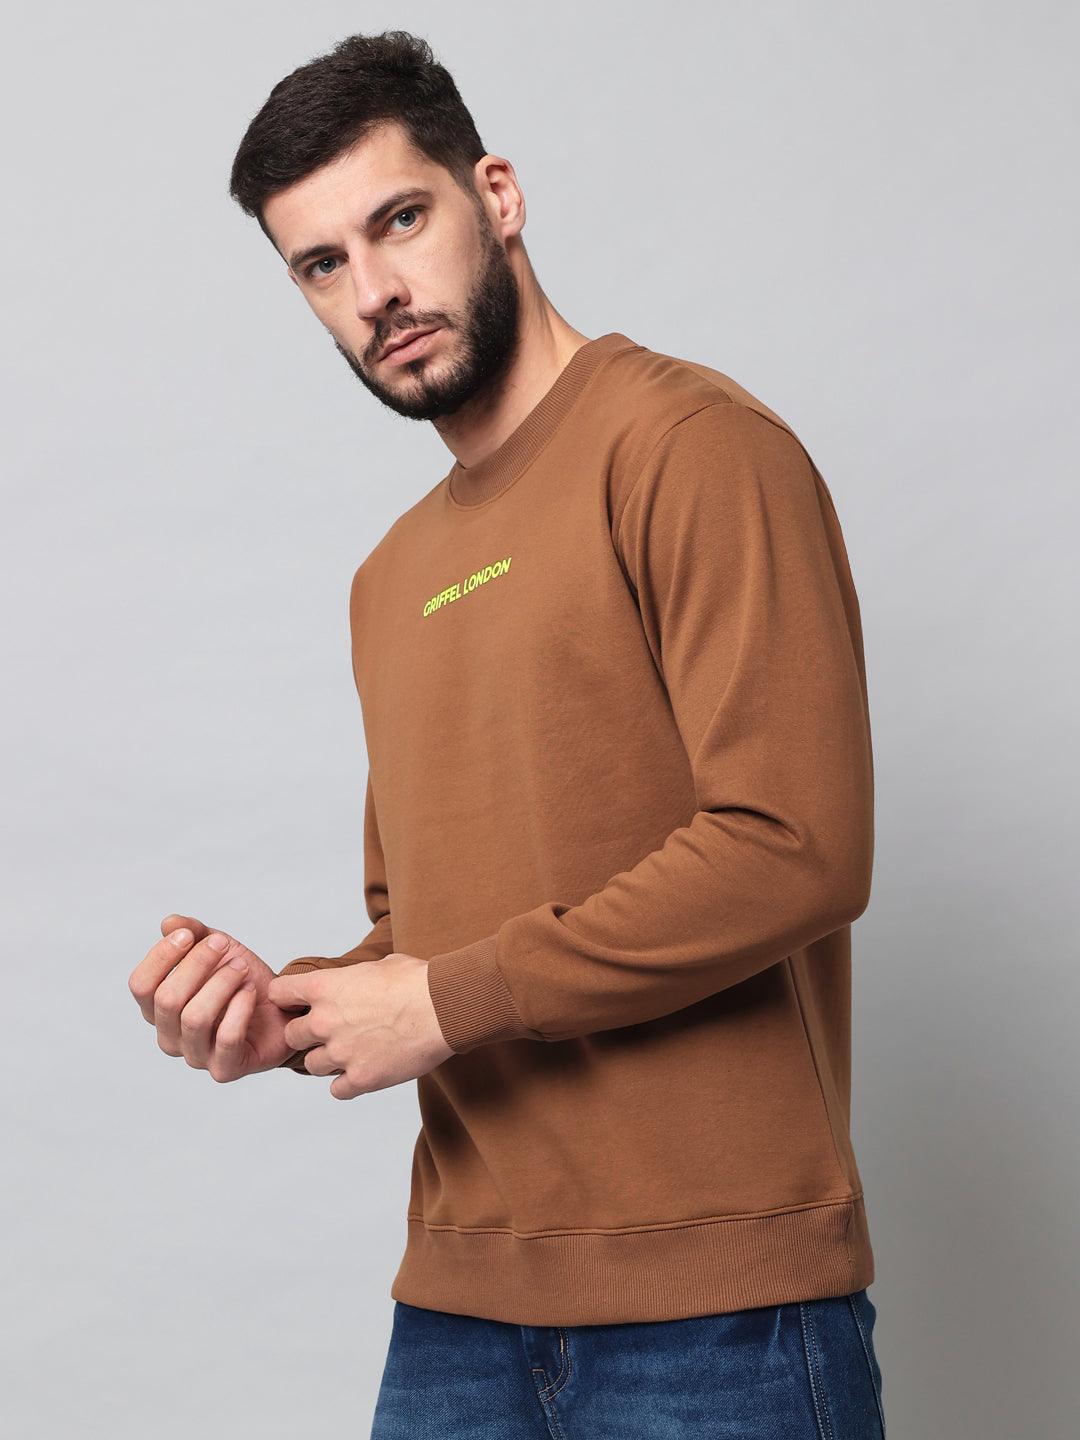 Griffel Men's Cotton Fleece Round Neck Brown Sweatshirt with Full Sleeve and Front Logo Print - griffel